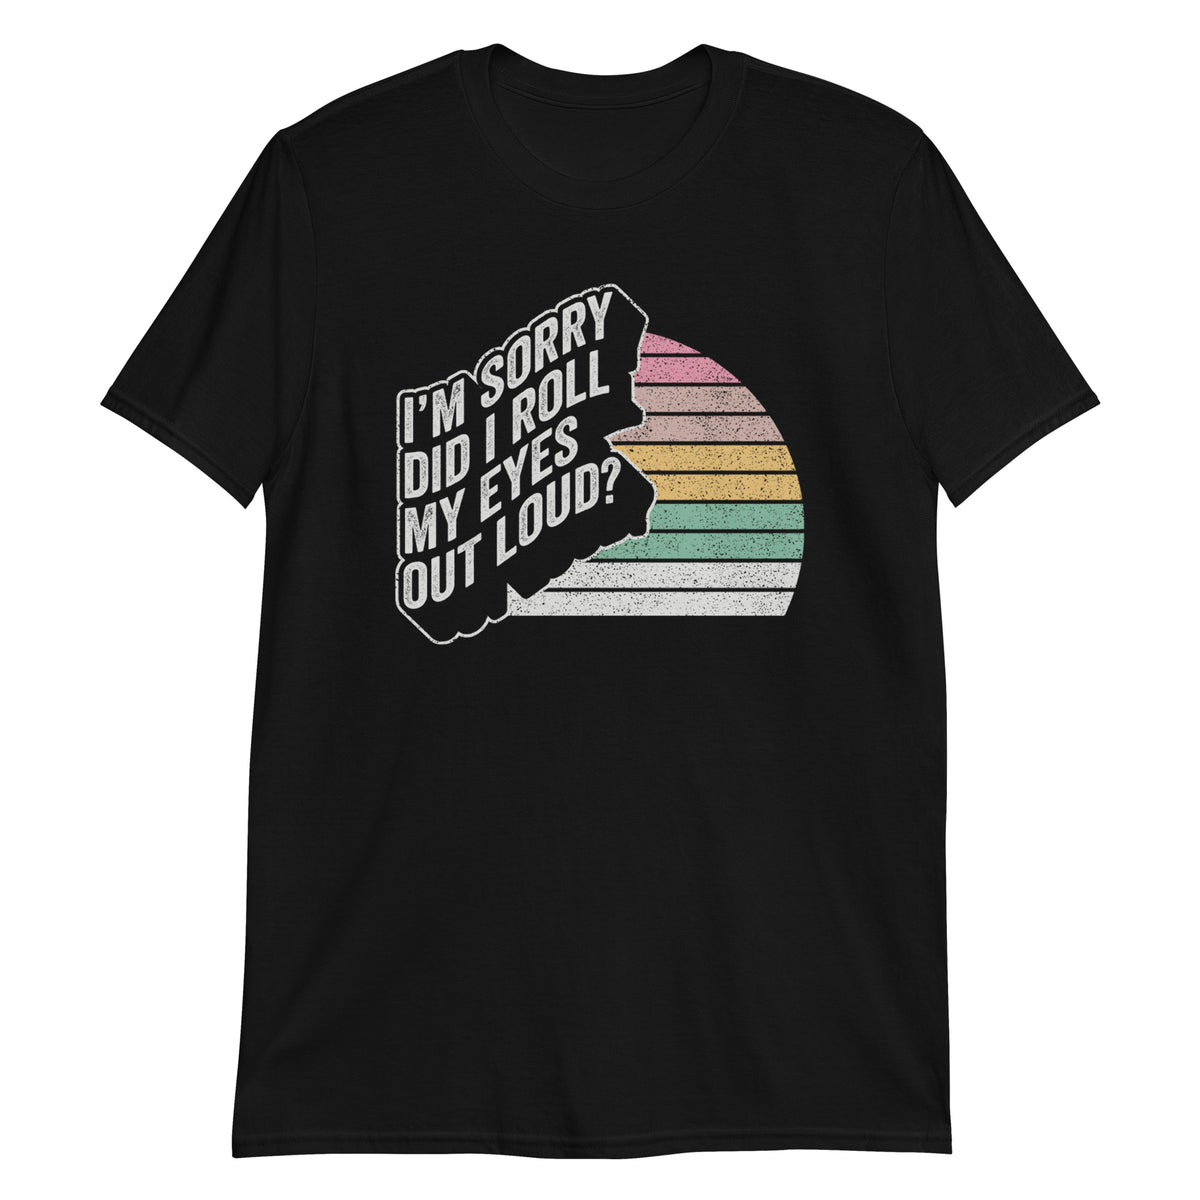 I'm Sorry Did I Roll My Eyes Out Loud, Funny Sarcastic Retro T-Shirt